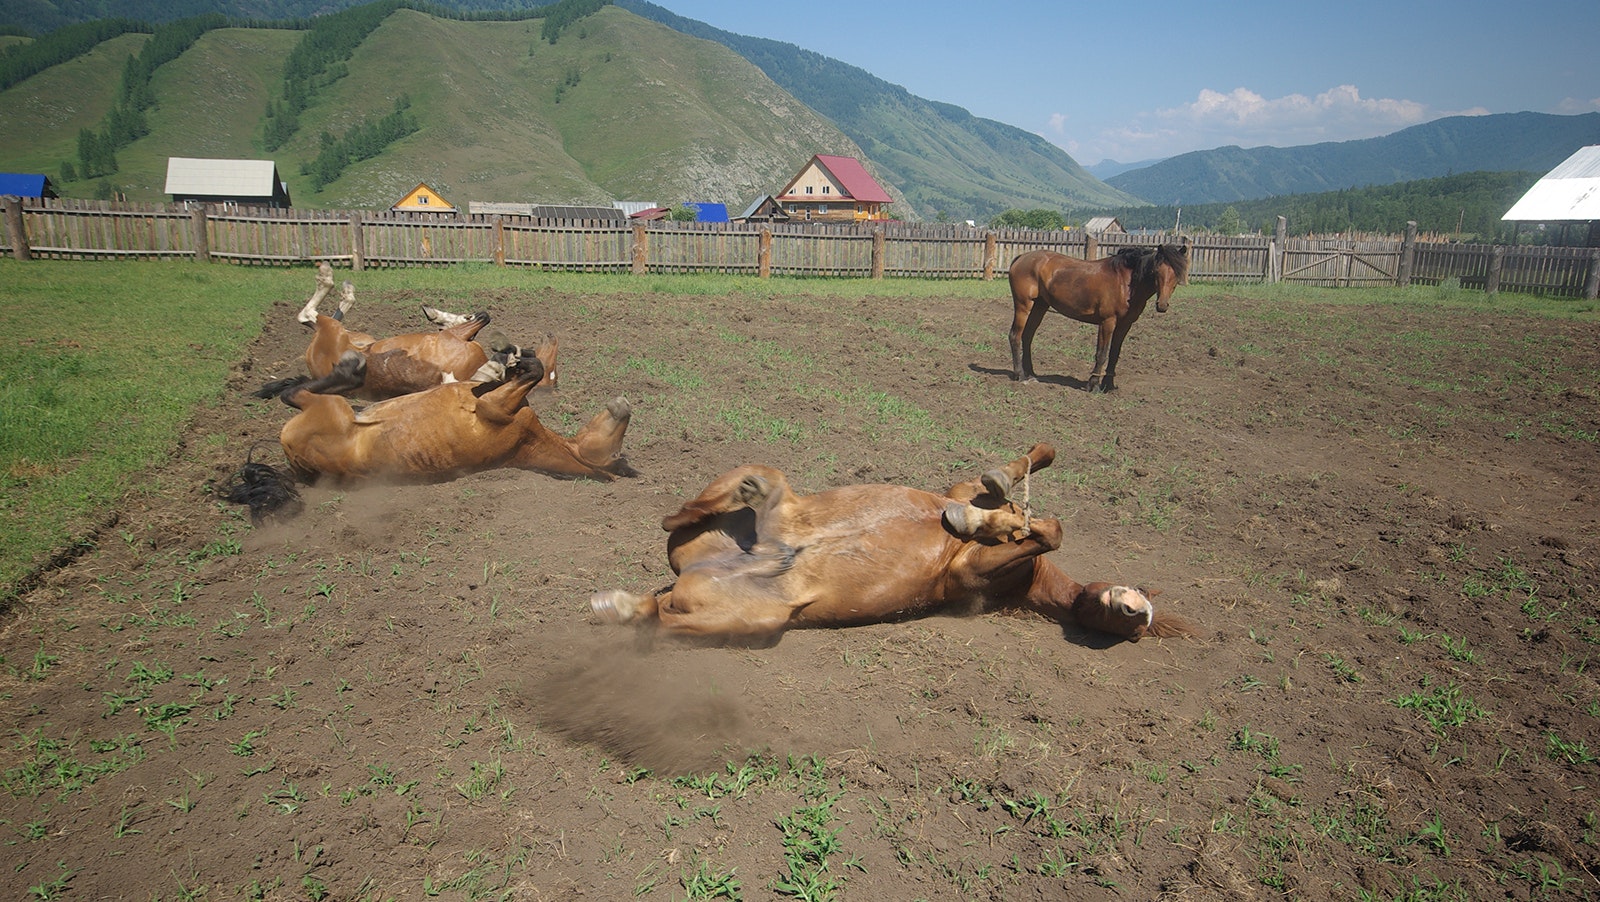 A group of horses enjoy a roll in the dirt in this file photo.